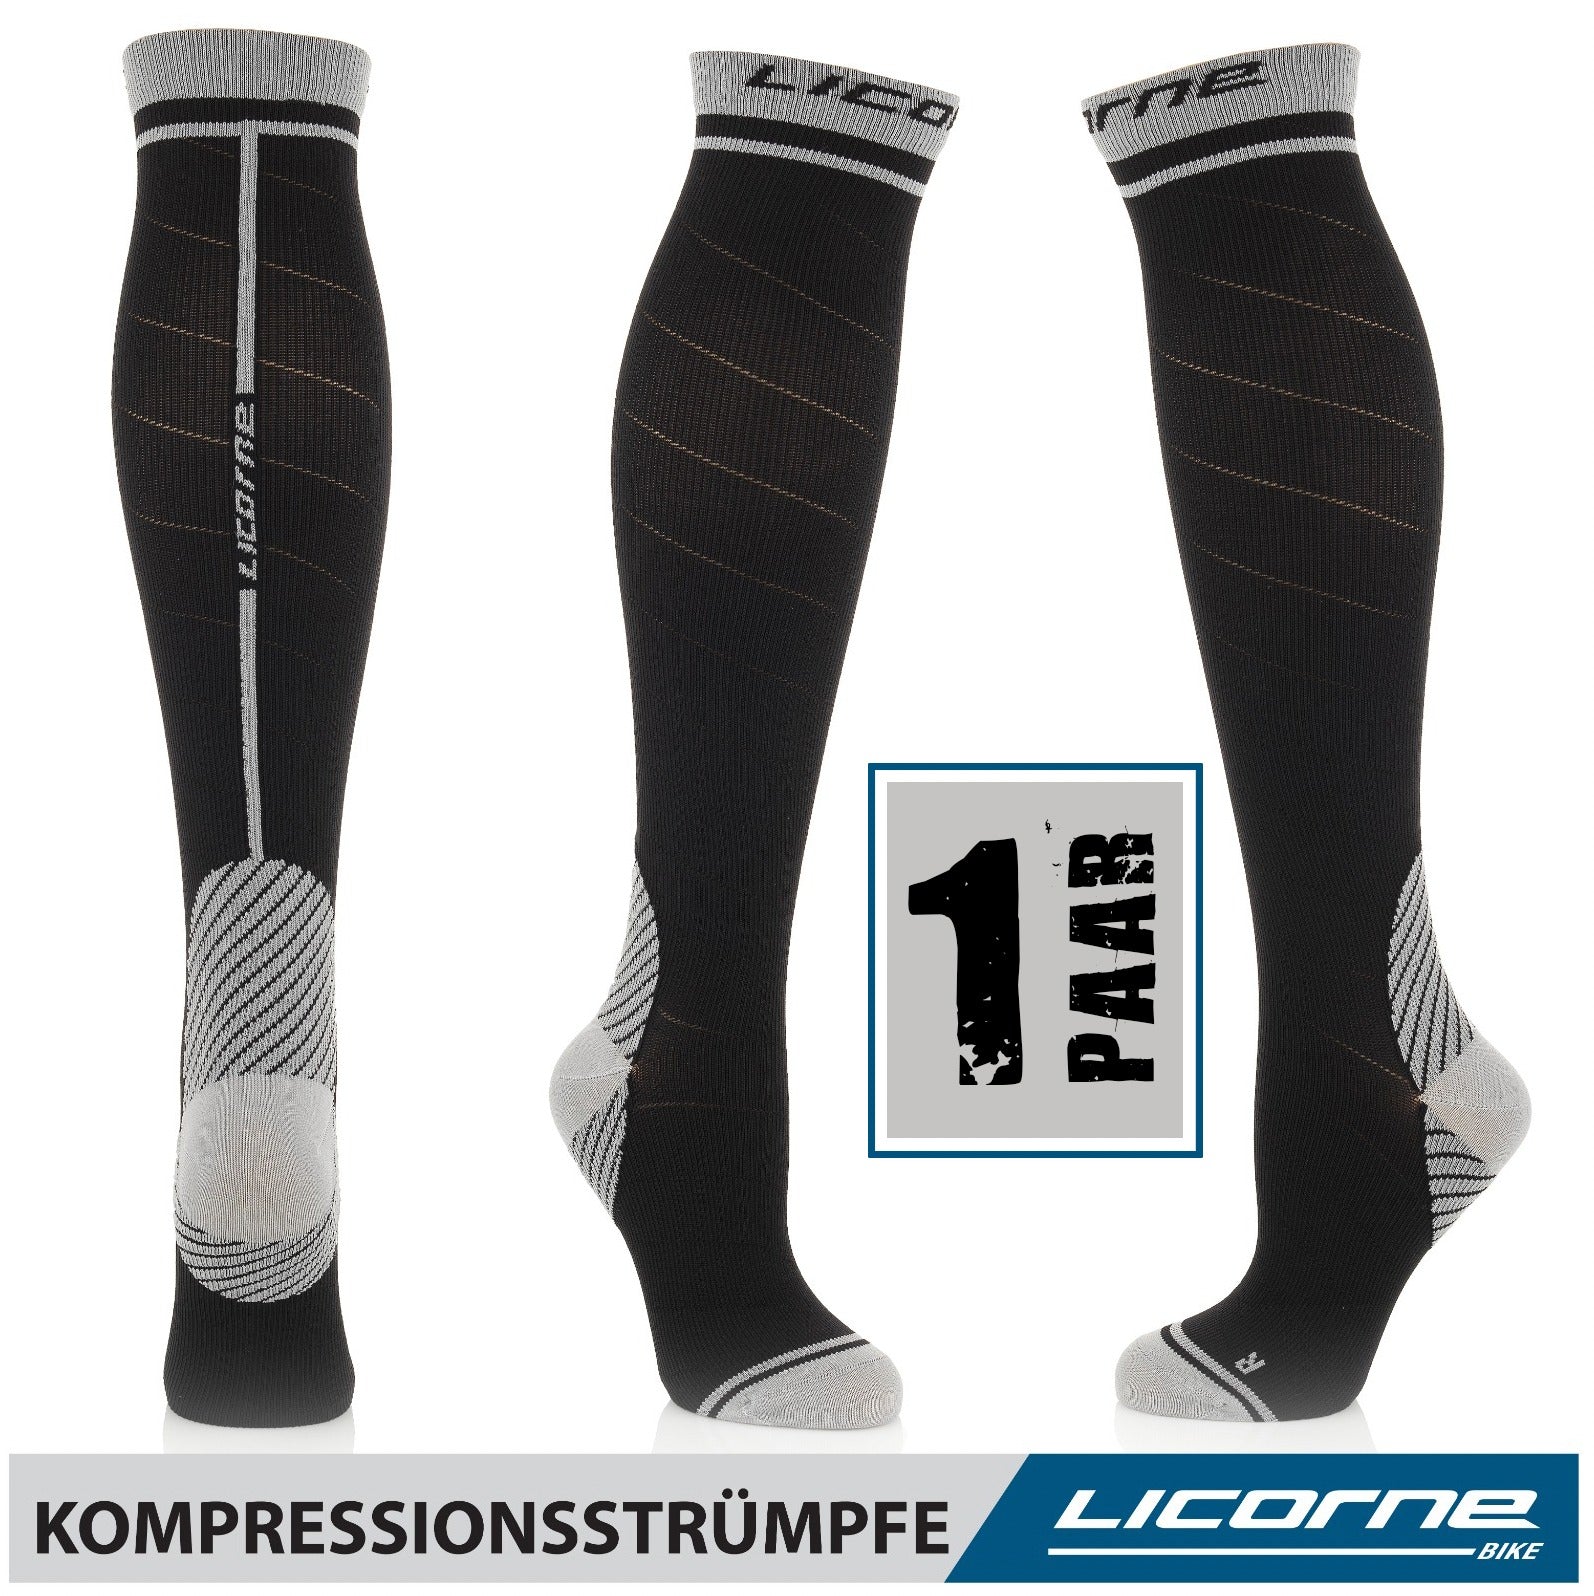 Licorne compression thrombosis support stockings